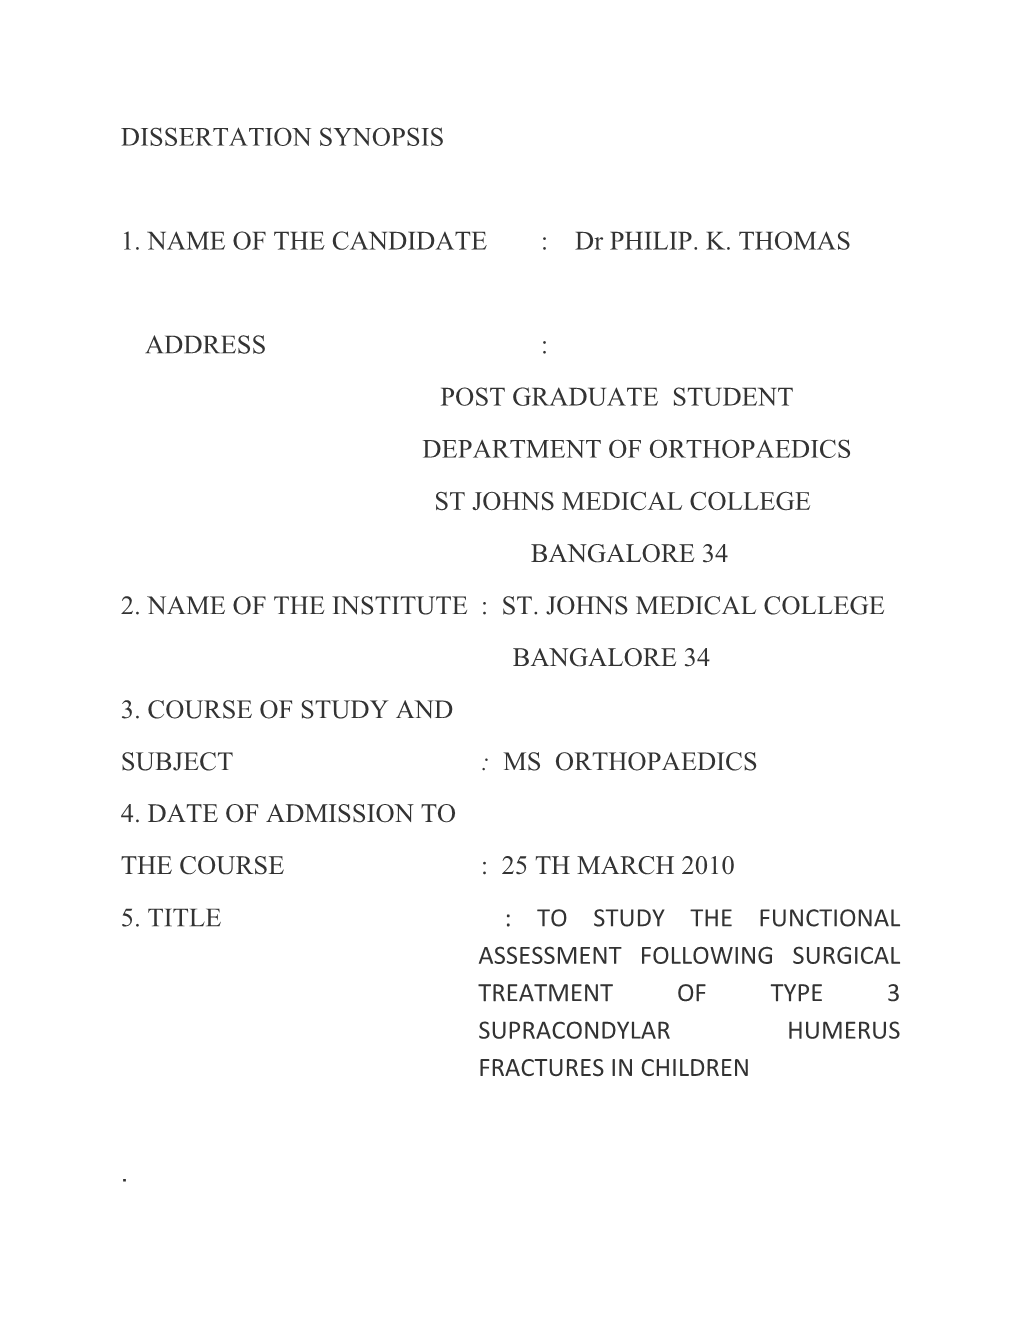 1. NAME of the CANDIDATE : Dr PHILIP. K. THOMAS